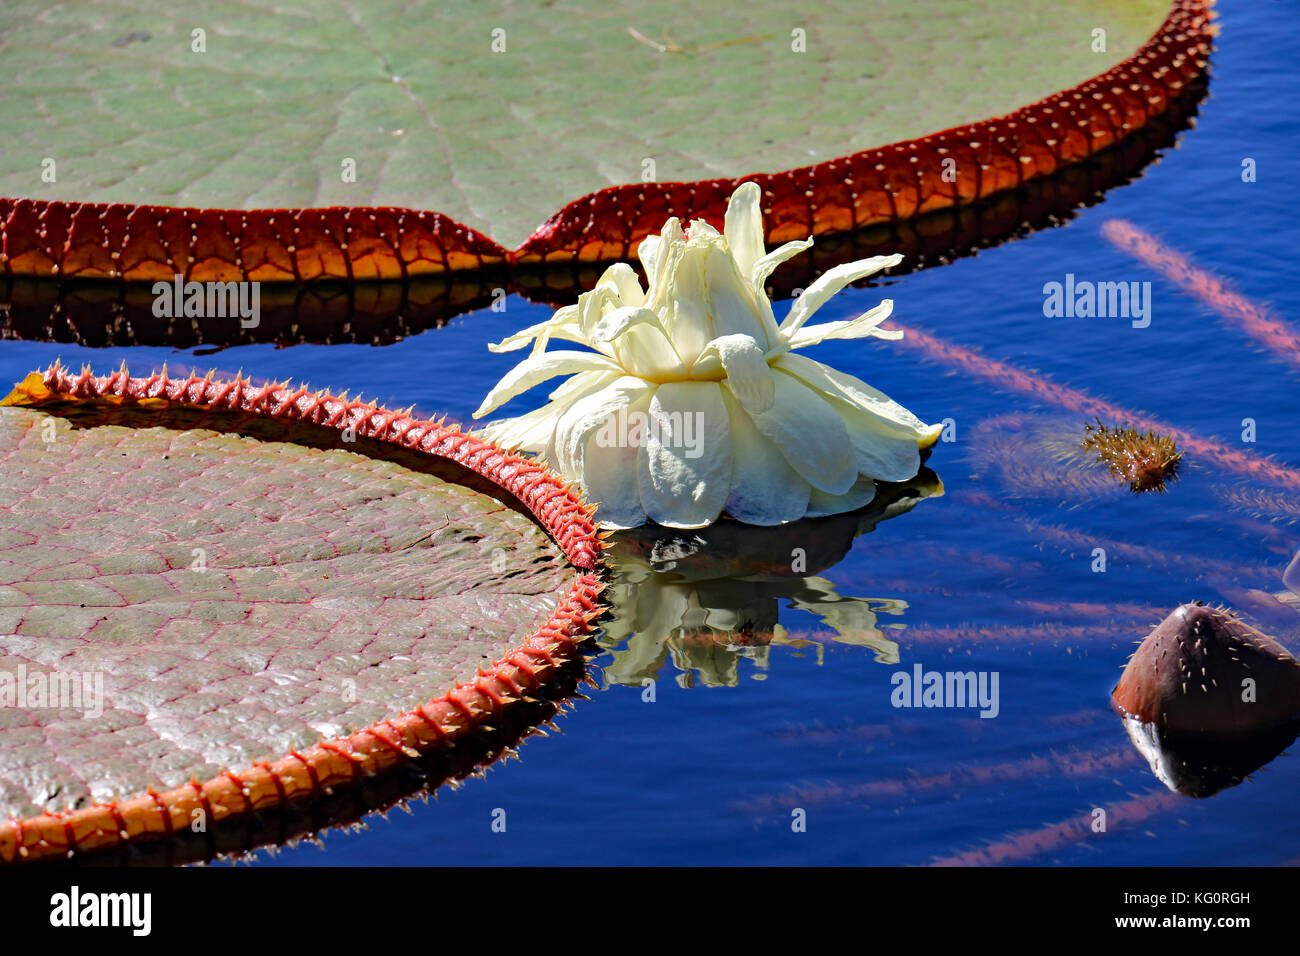 Everything  seems larger than life in this water garden as a very large lotus blossom emerges among the gigantic lotus lily pads Stock Photo